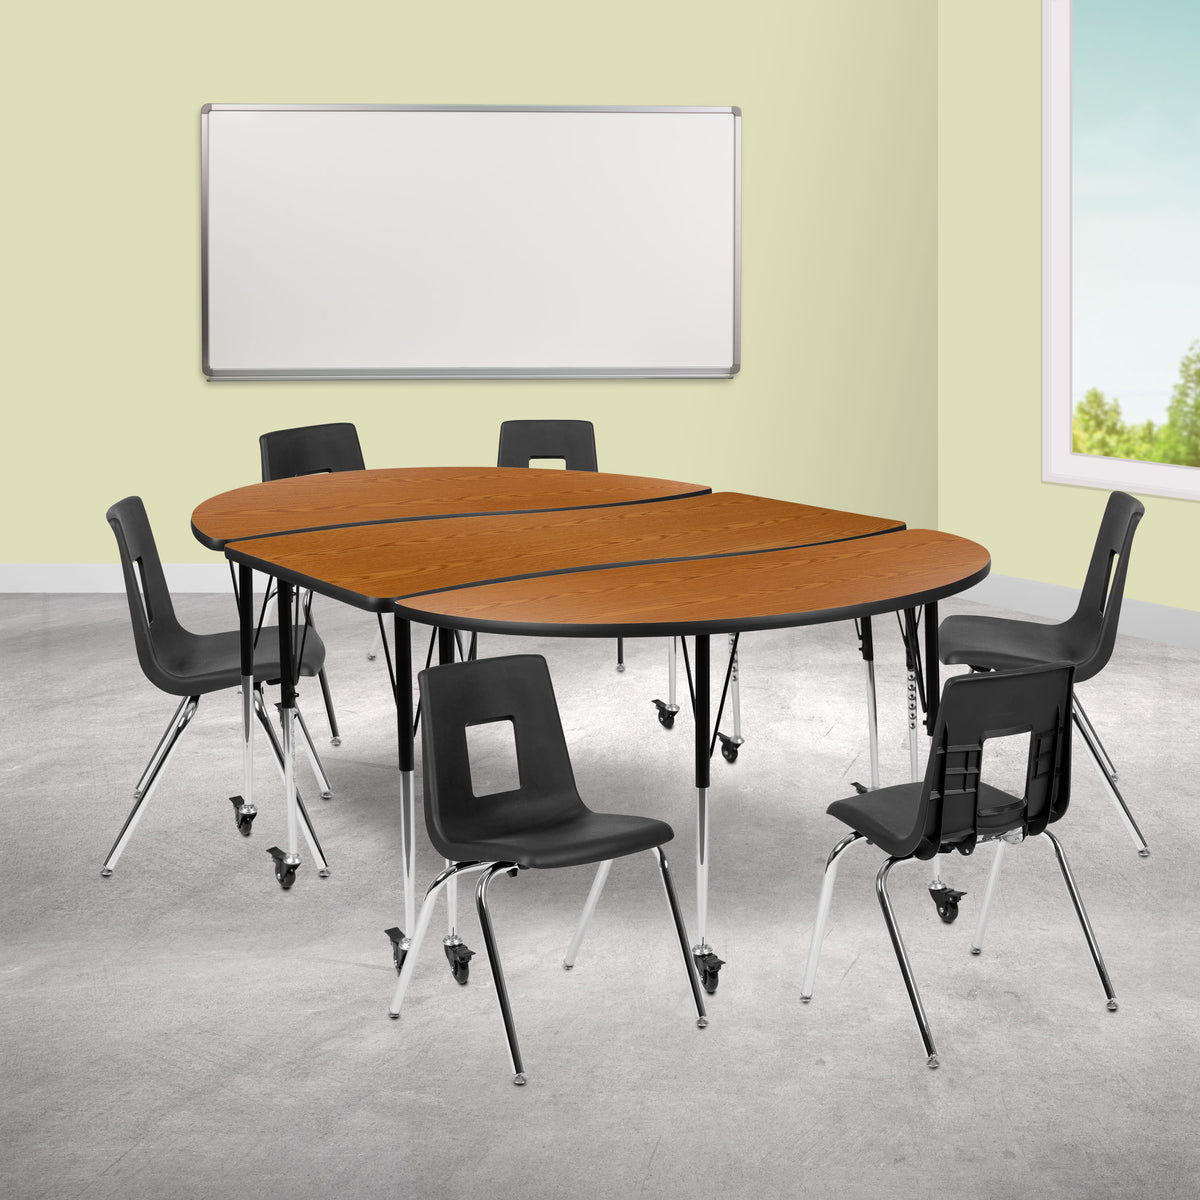 Oak |#| Mobile 86inch Oval Wave Activity Table Set-18inch Student Stack Chairs, Oak/Black